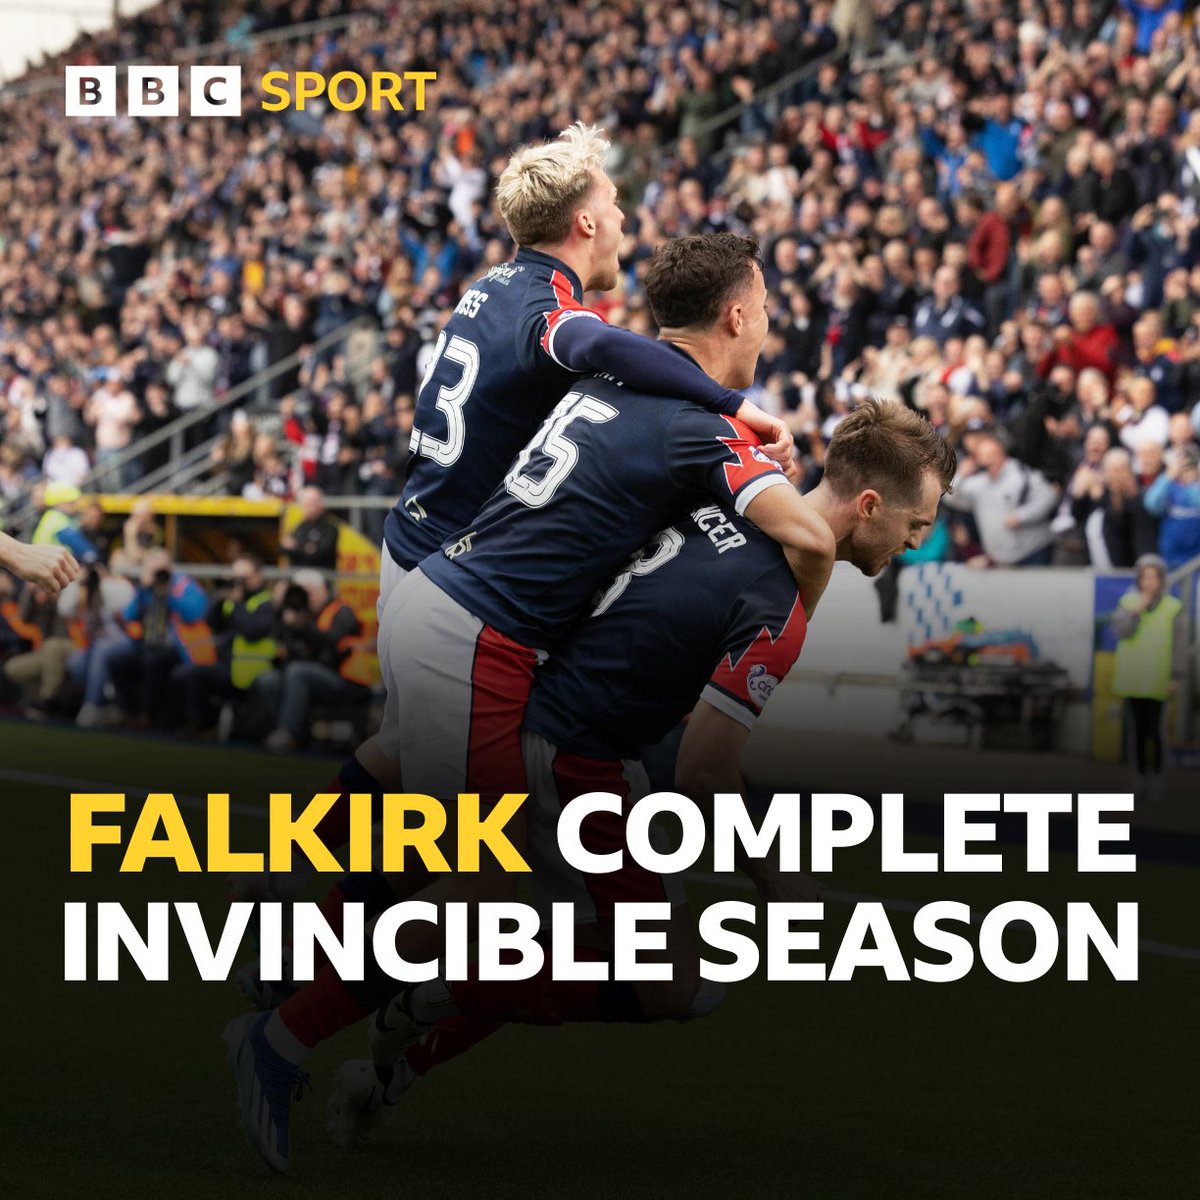 Falkirk have completed the entire Scottish League 1 season unbeaten.

27 wins✅
9 draws⭕️
0 defeats❌

#BBCFootball